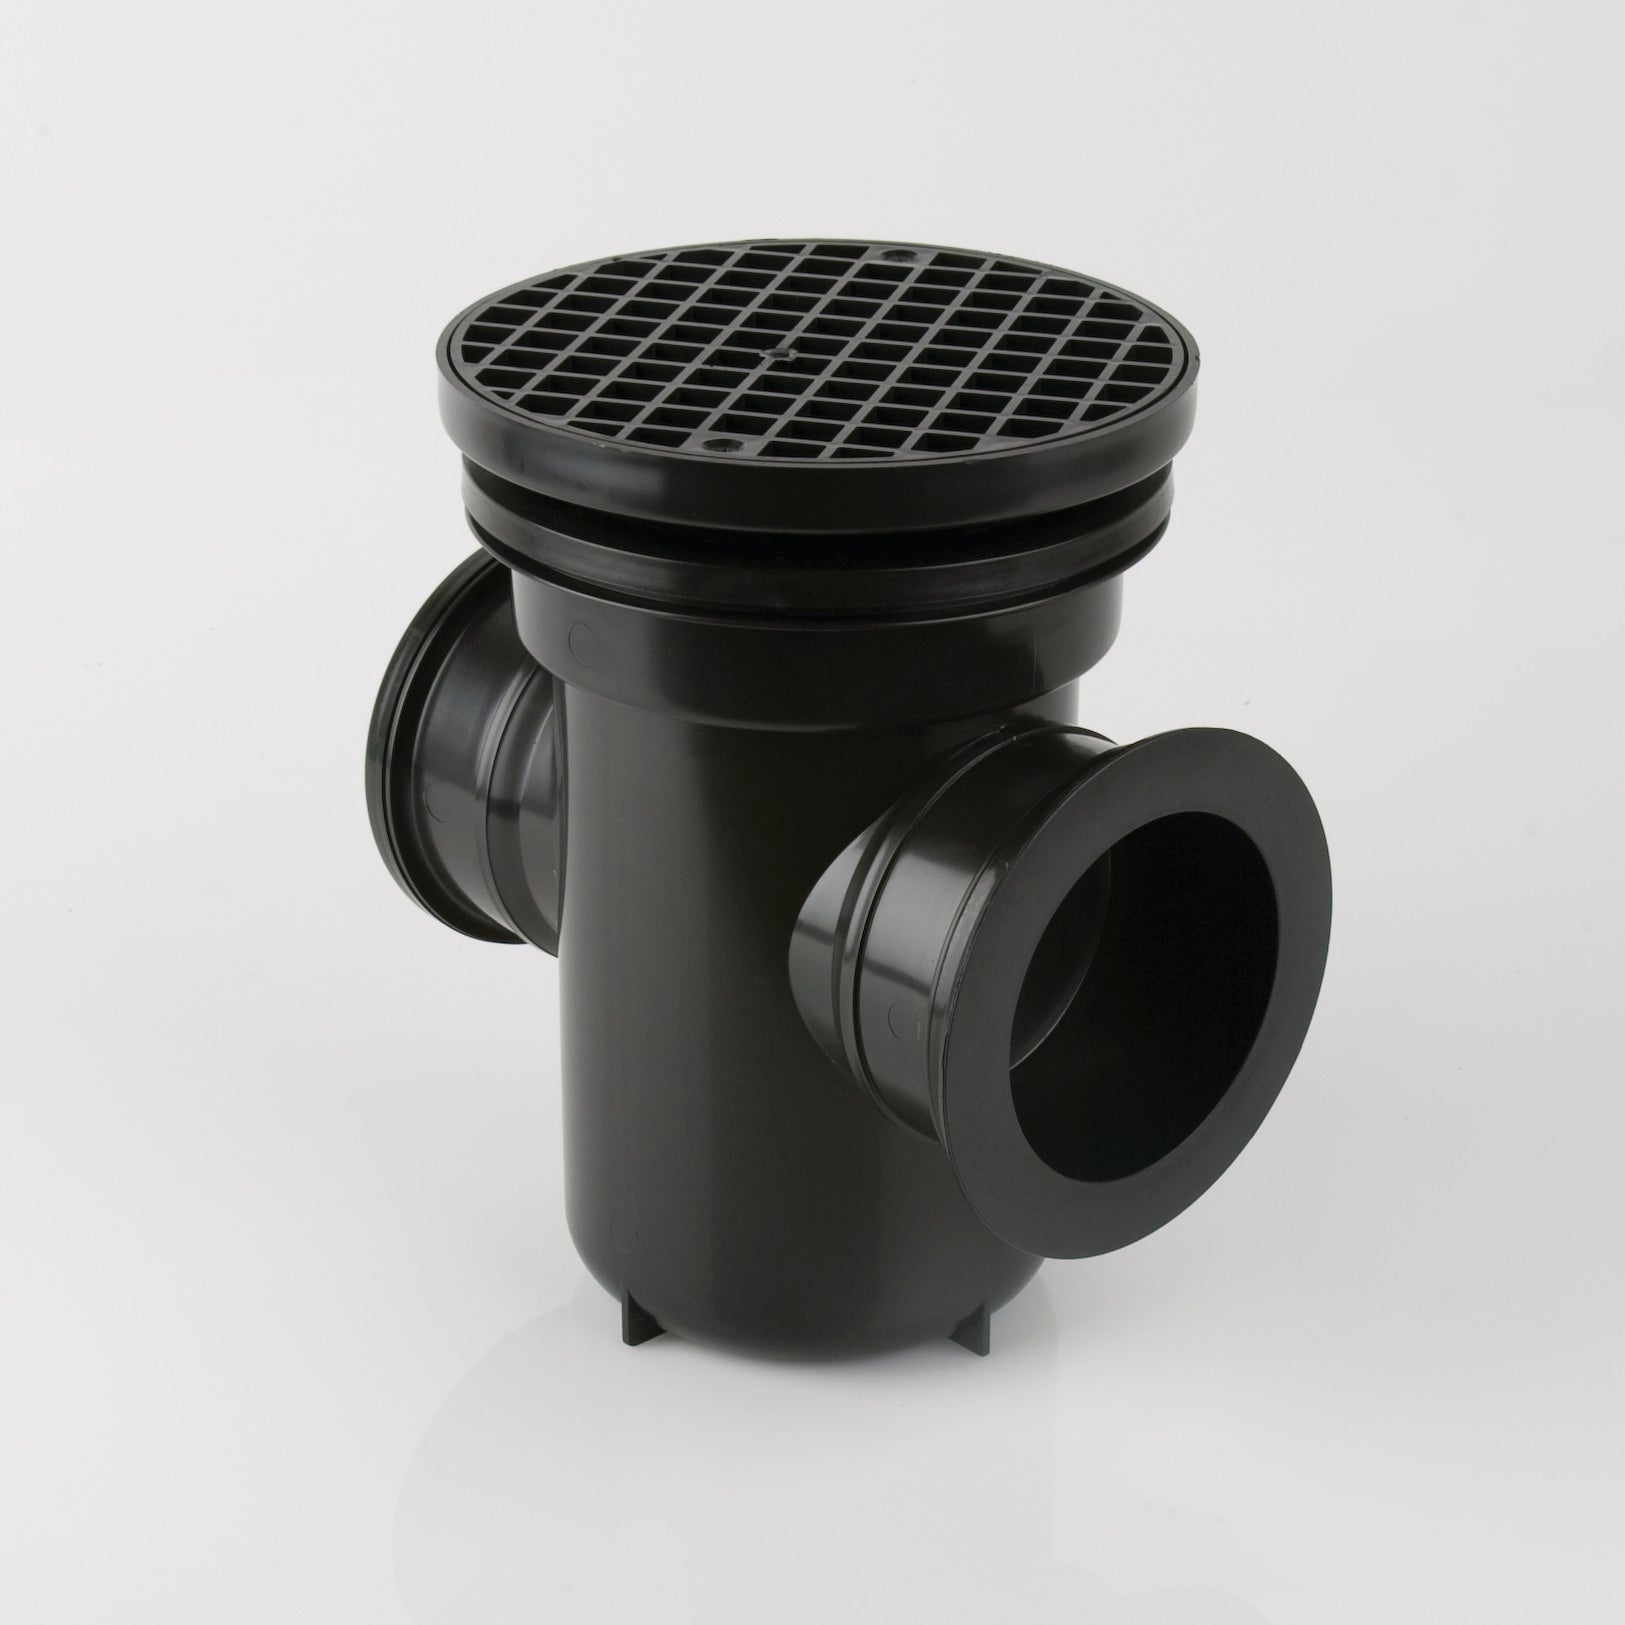 90 Degree Back Inlet Roddable Gully Outlet (Round Grid | Black)